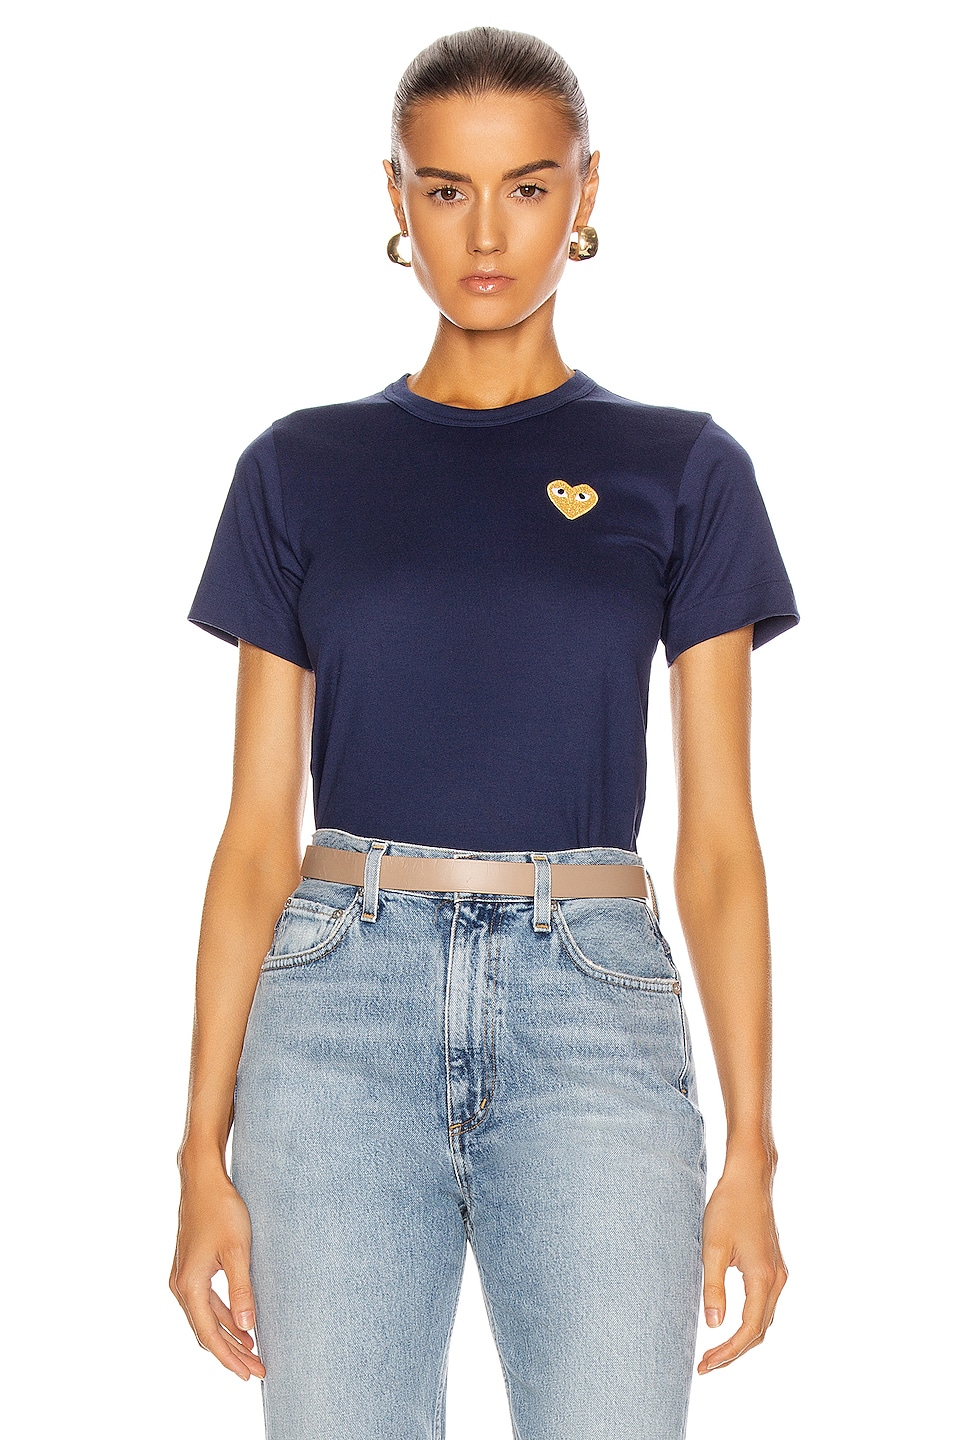 COMME des GARCONS PLAY Gold Heart Emblem Tee in Navy | FWRD